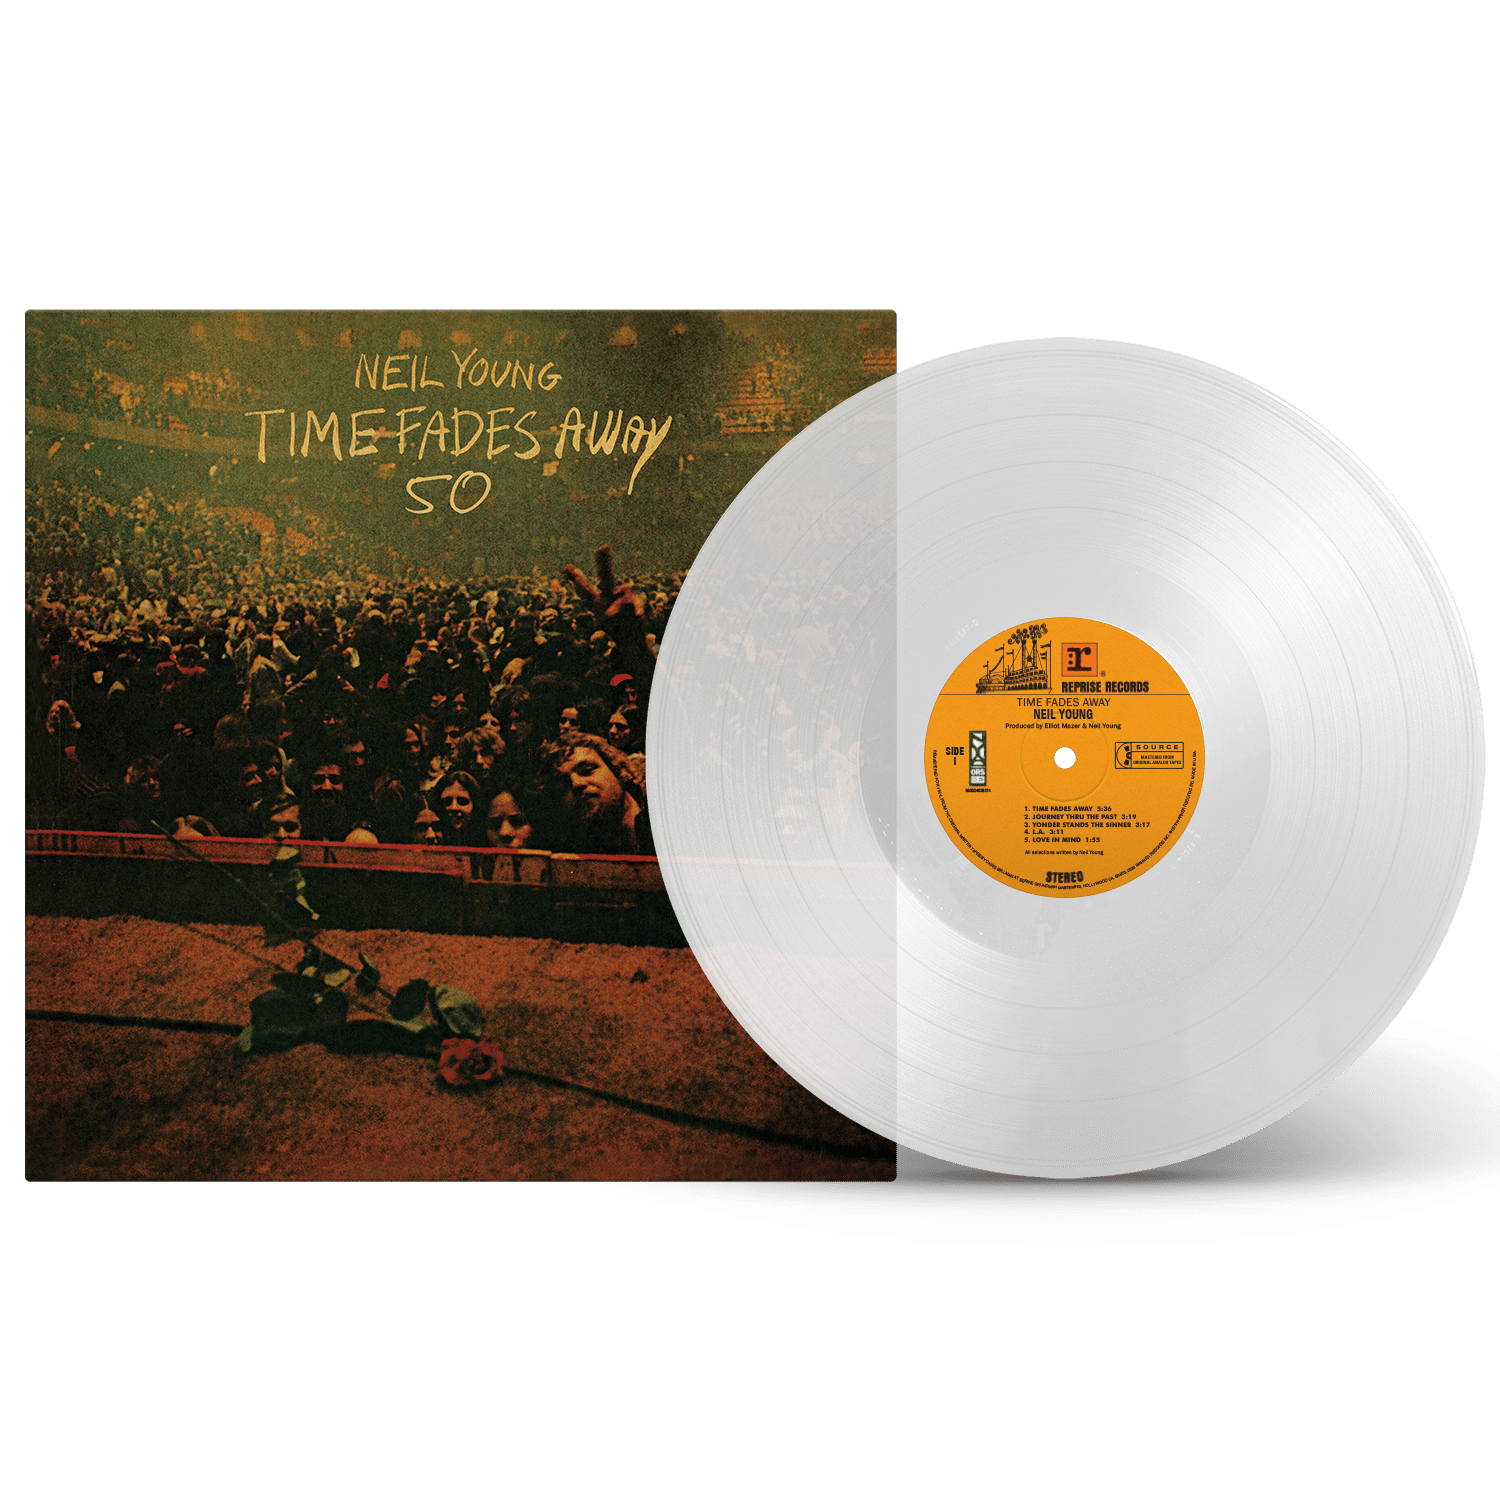 Neil-Young-Time-Fades-Away-50-Vinyl-Product-Shot.png